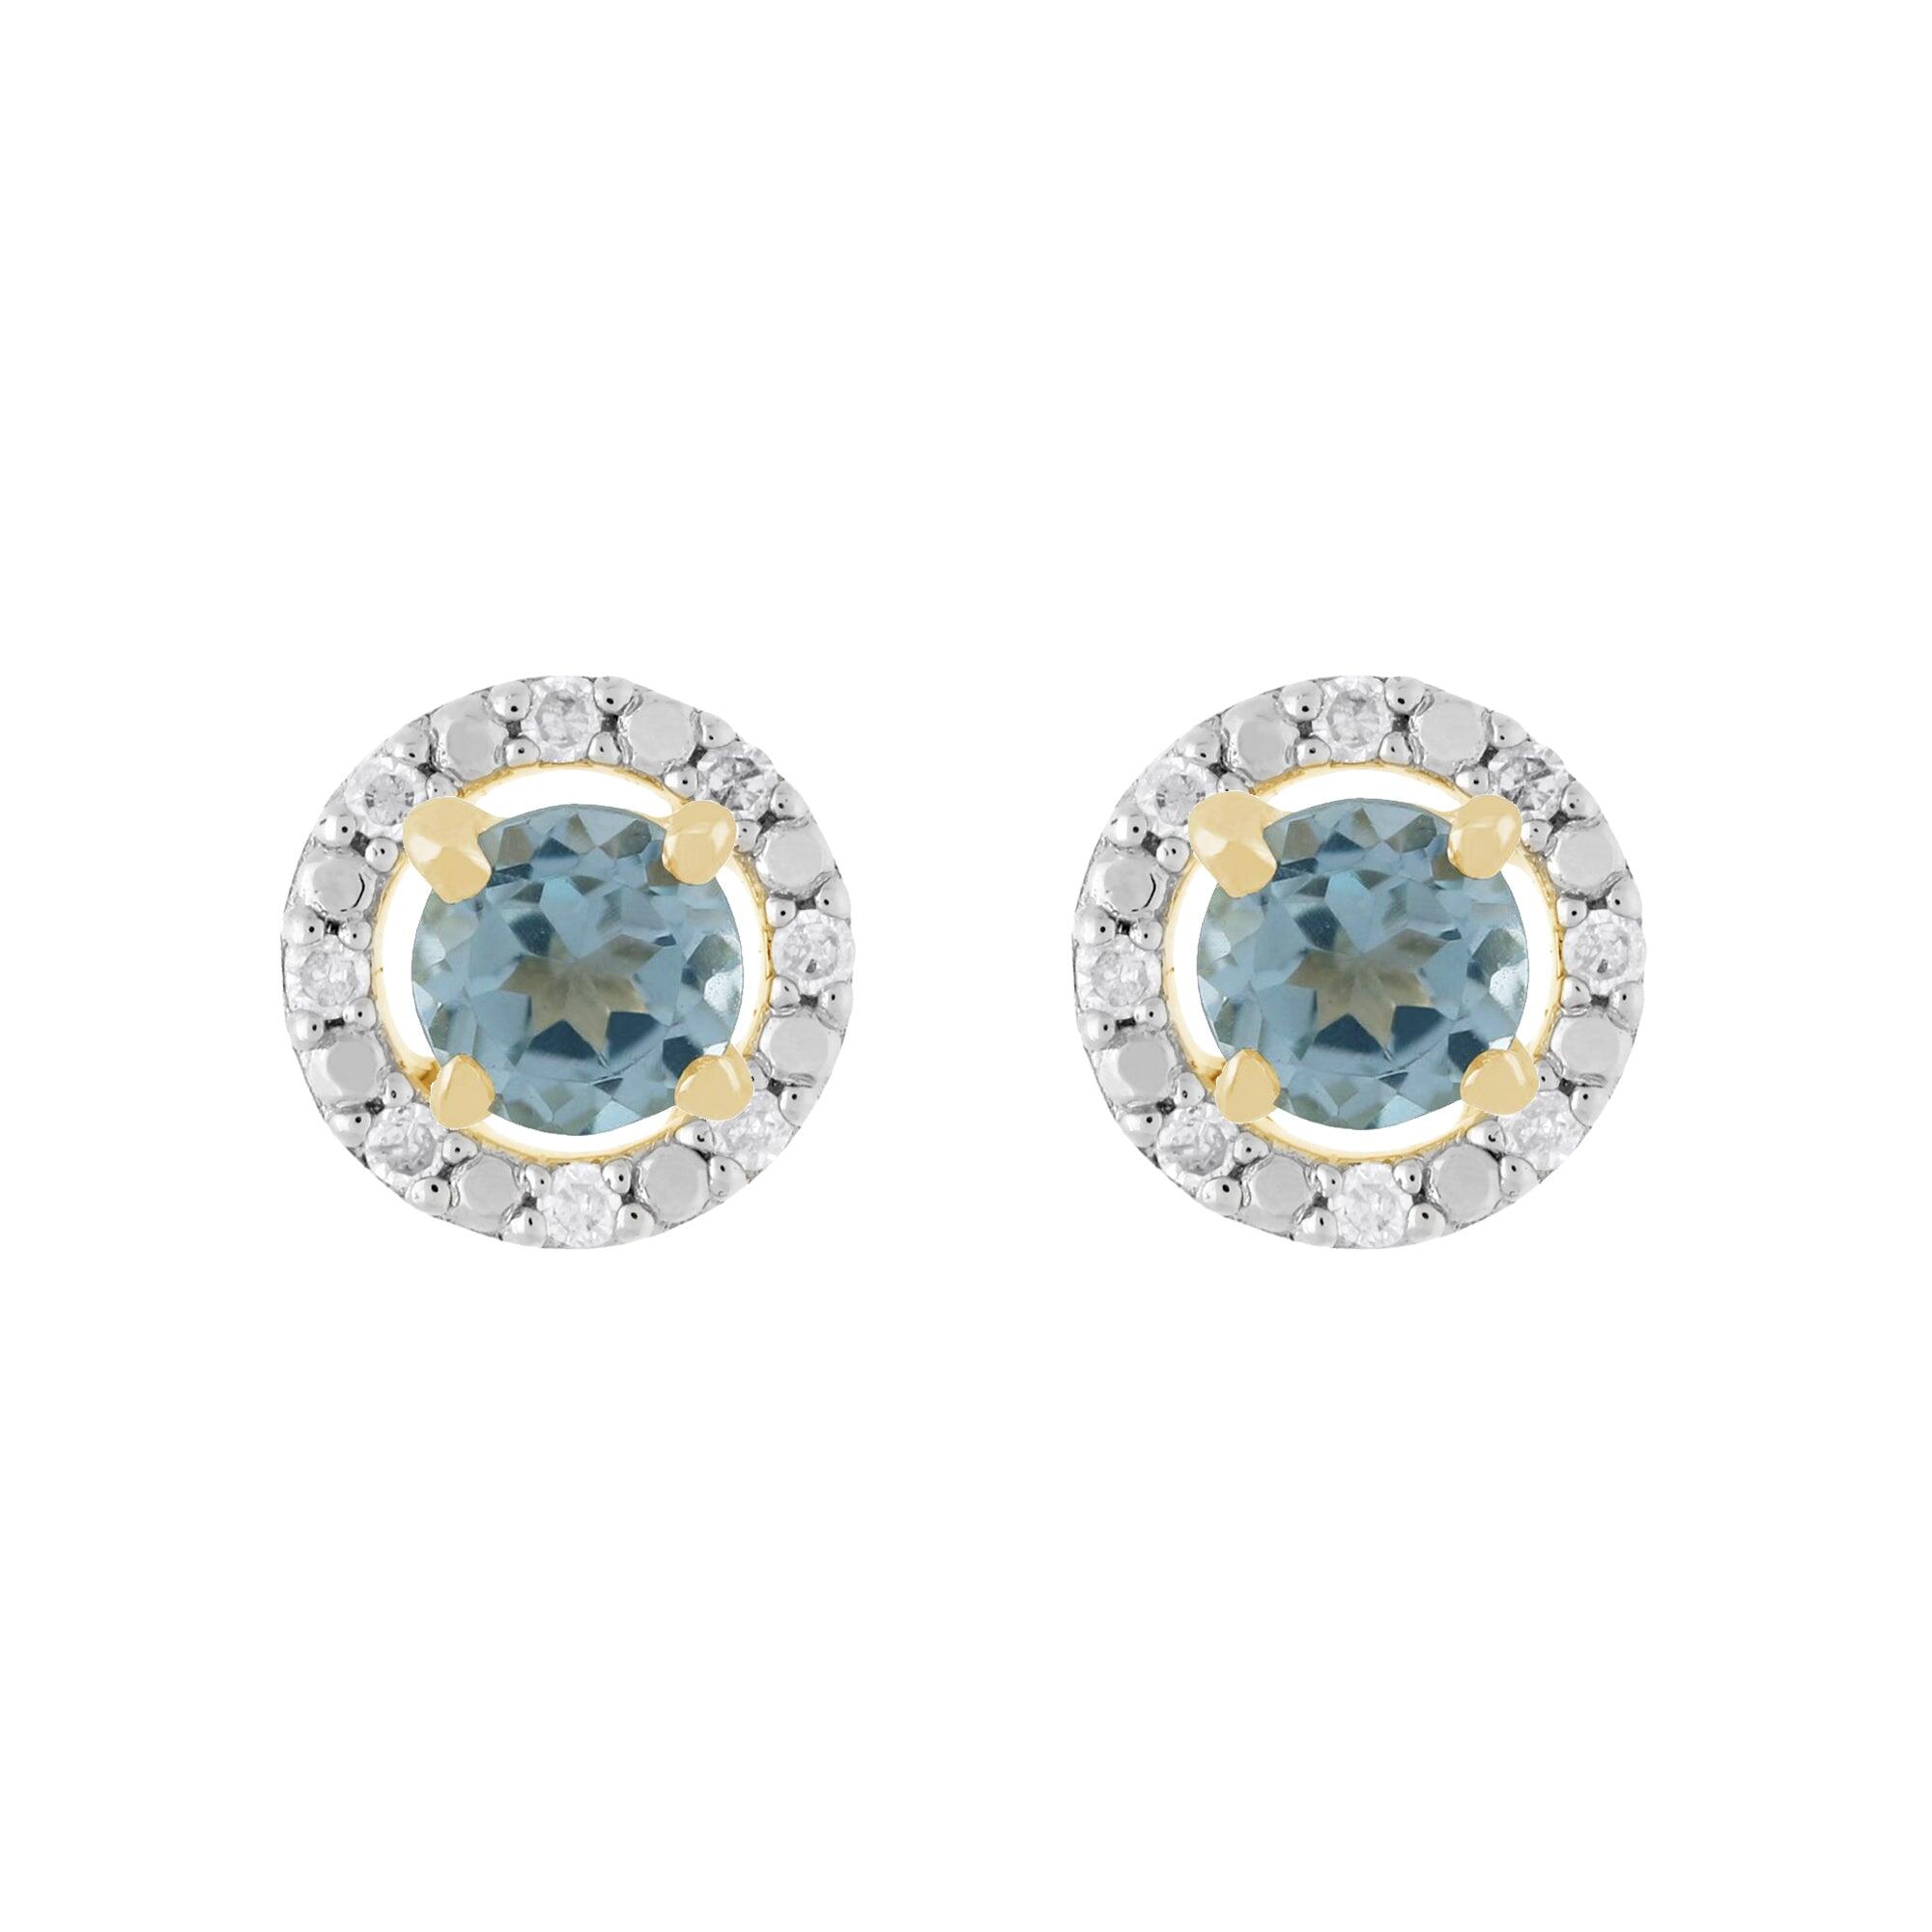 Classic Round Blue Topaz Stud Earrings with Detachable Diamond Round Earrings Jacket Set in 9ct Yellow Gold